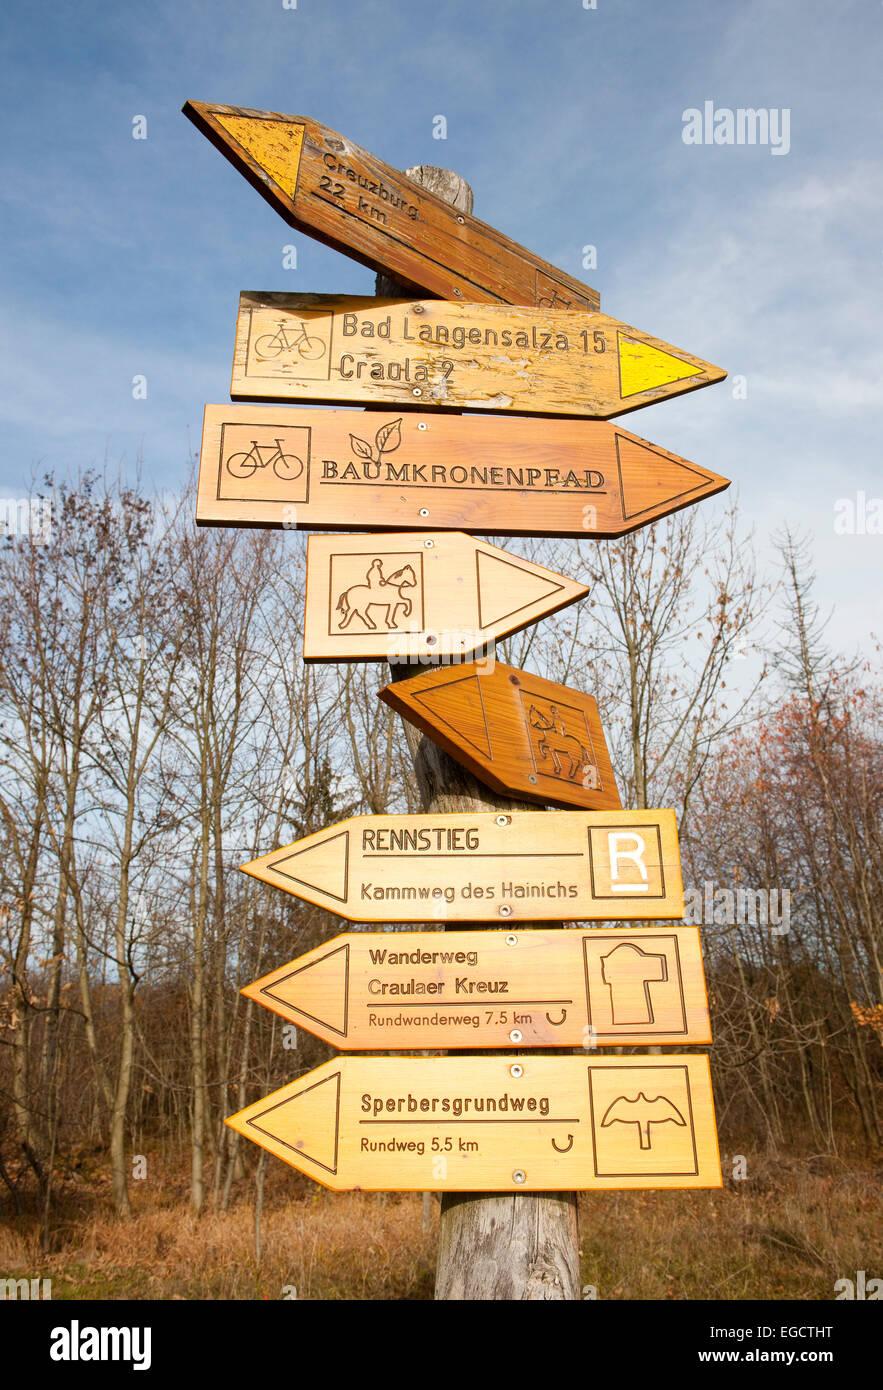 Signposts, Hainich National Park, Thuringia, Germany Stock Photo